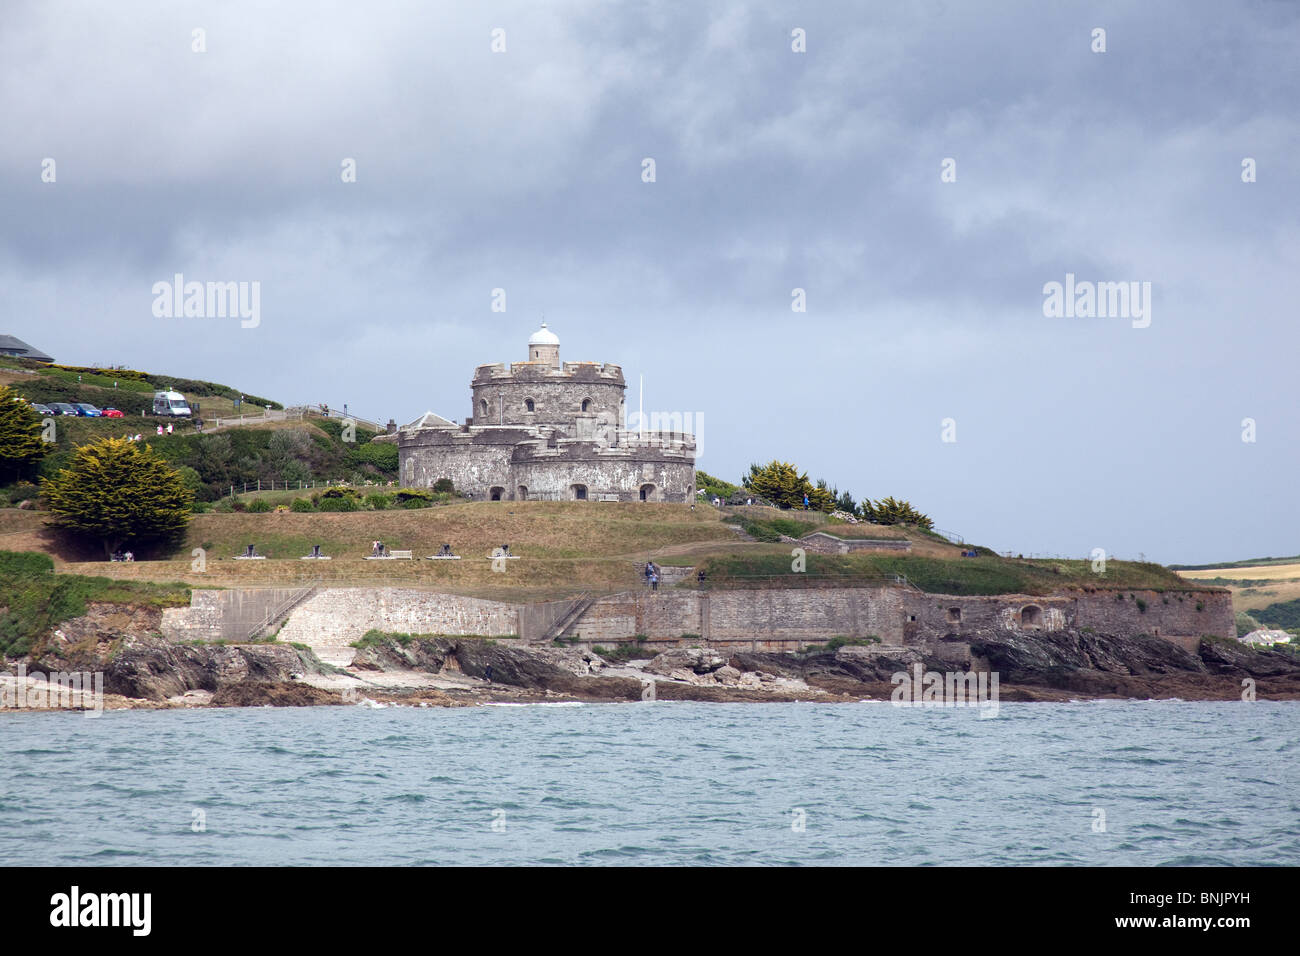 St Mawes château, Cornwall, Angleterre. Banque D'Images